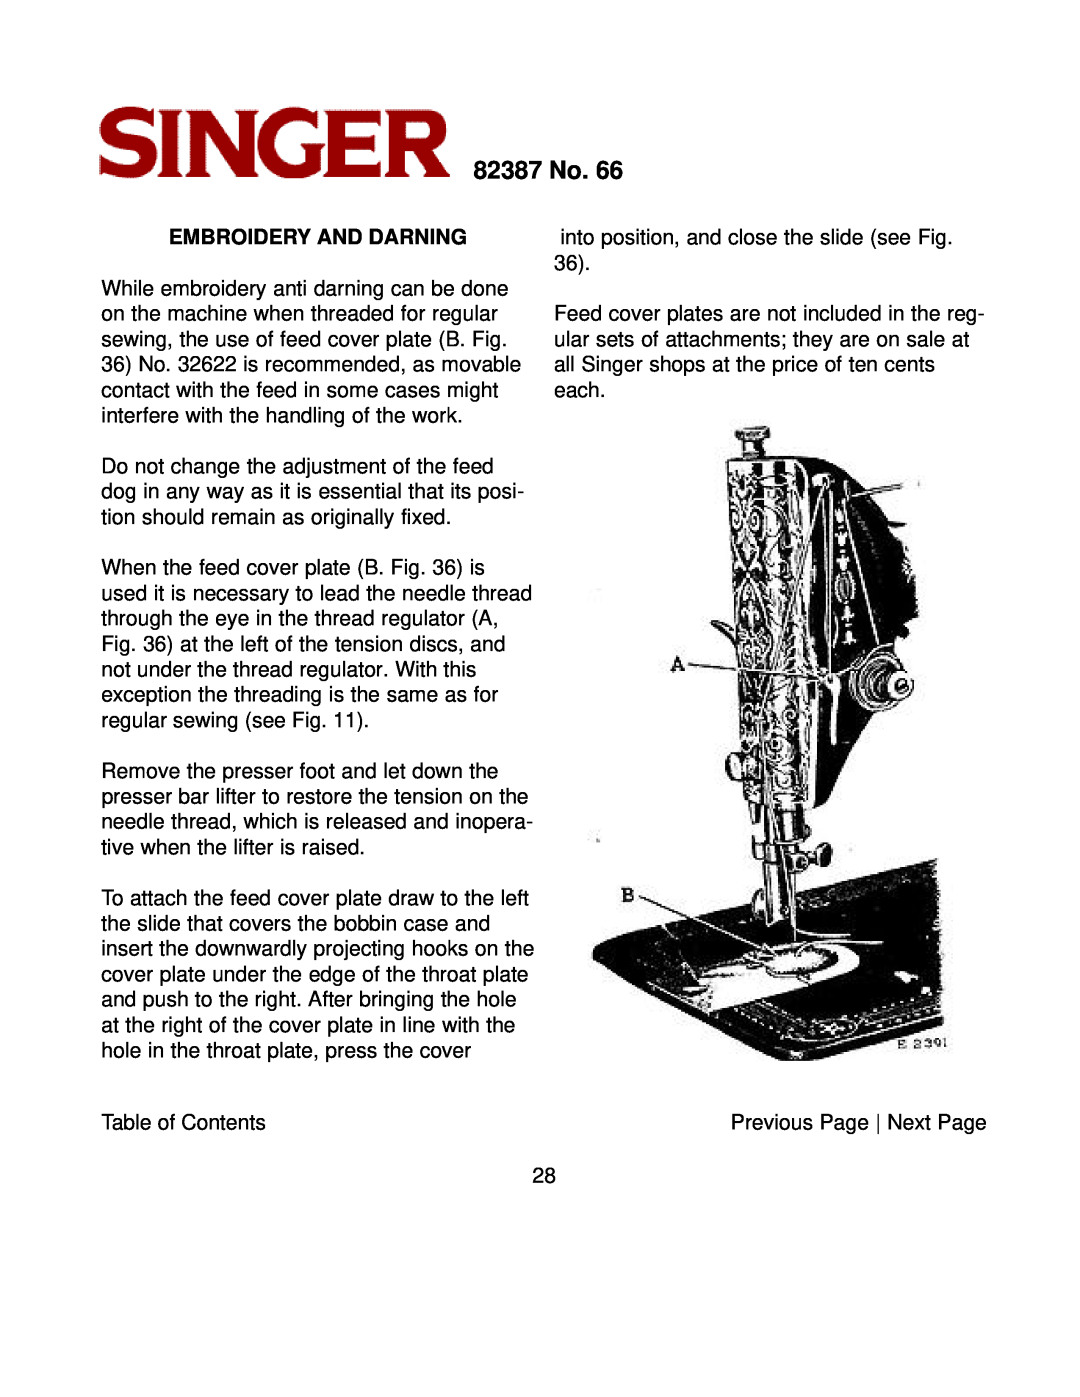 Singer instruction manual Embroidery And Darning, 82387 No 